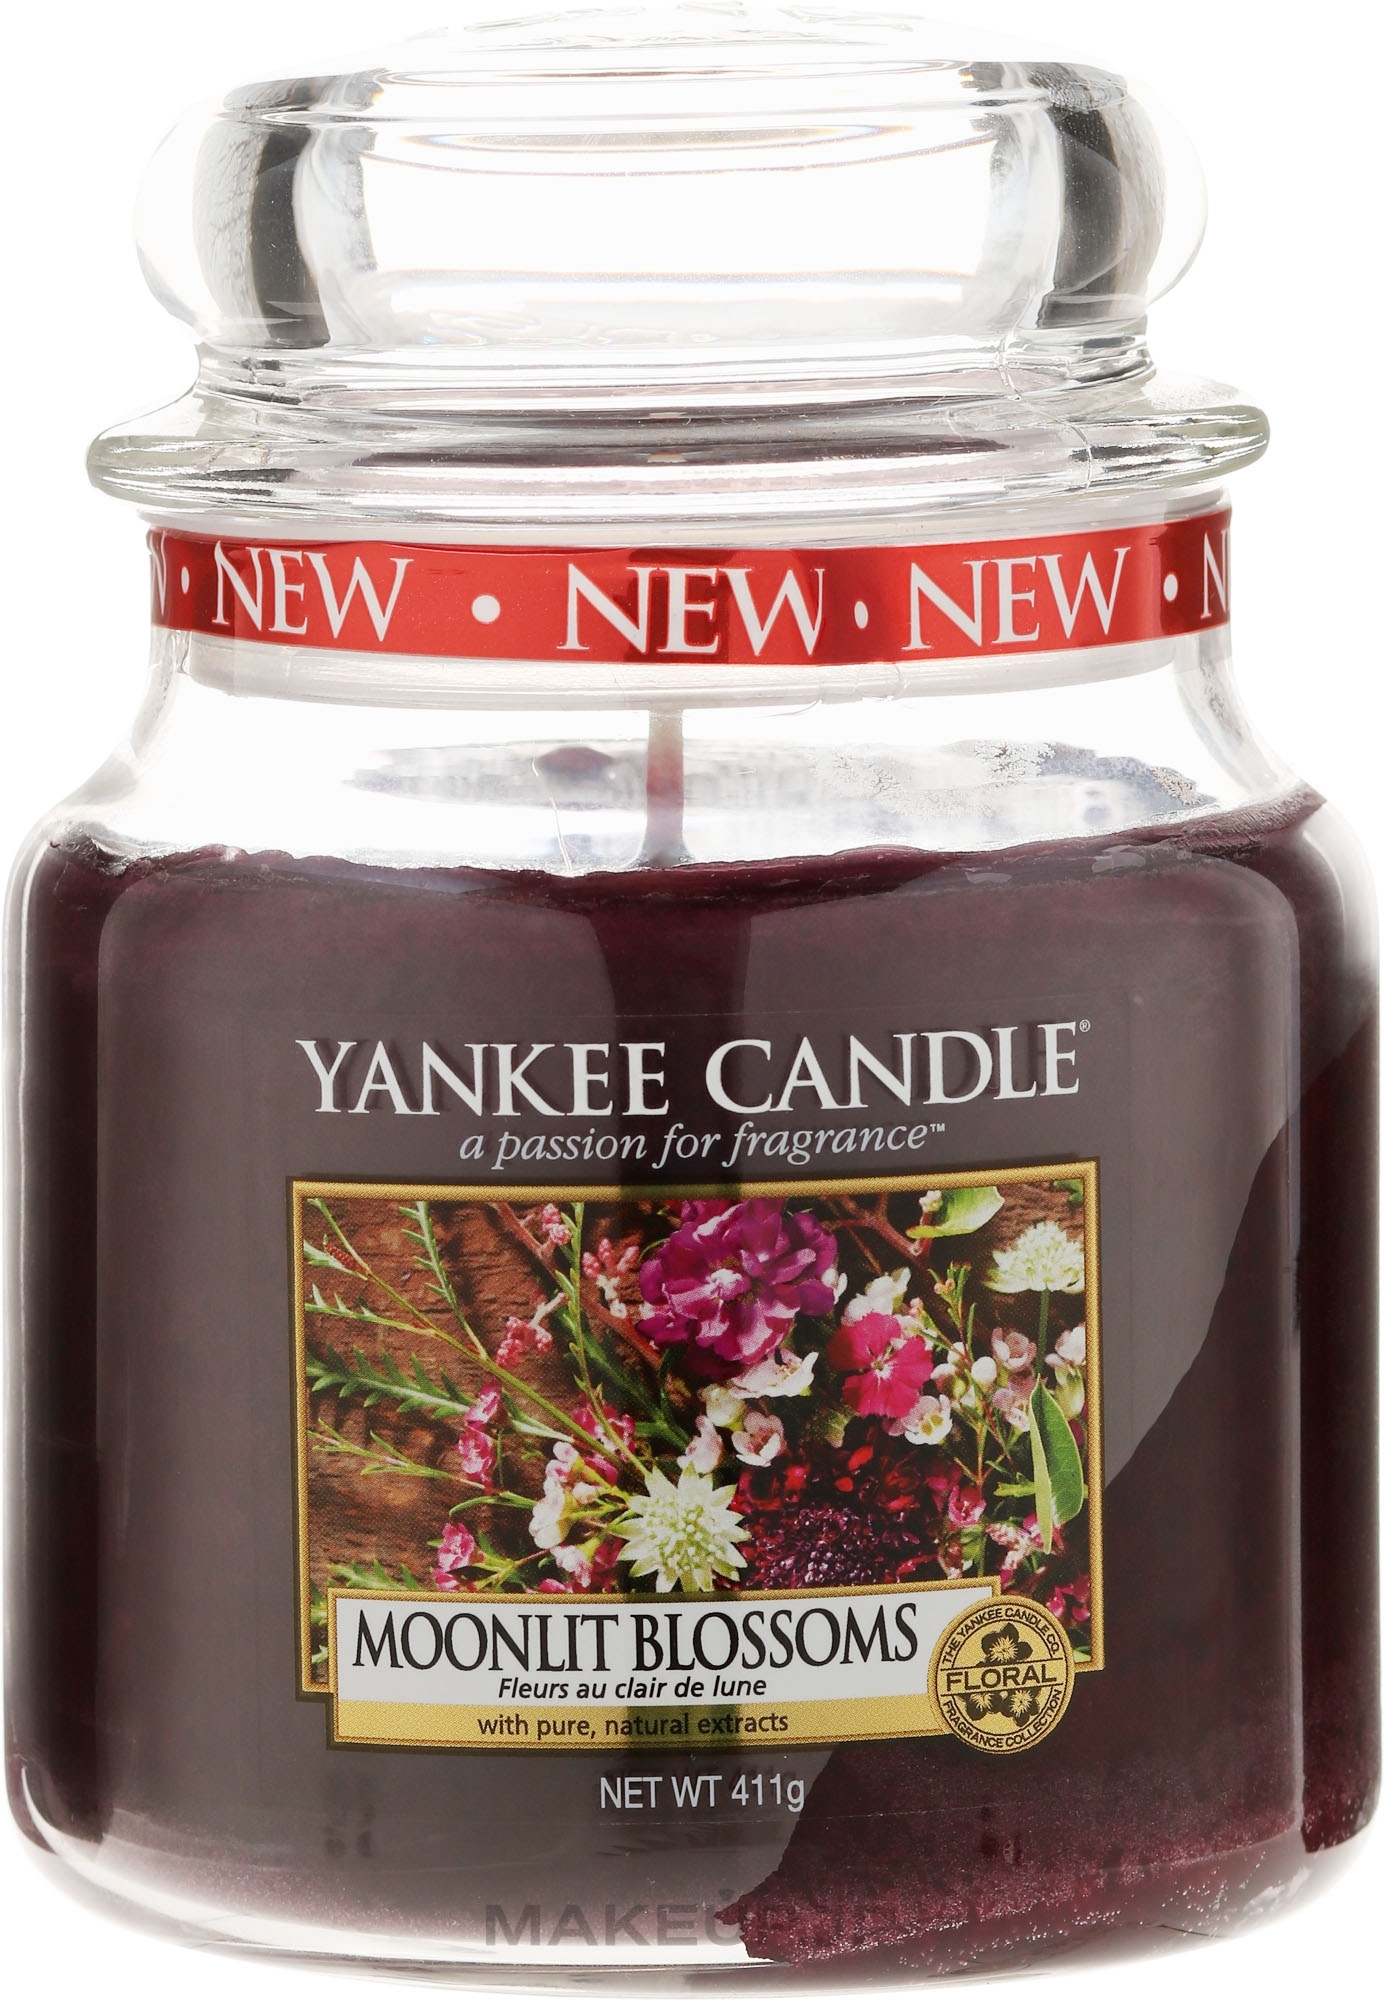 Scented Candle in Jar - Yankee Candle Moonlit Blossoms — photo 411 g